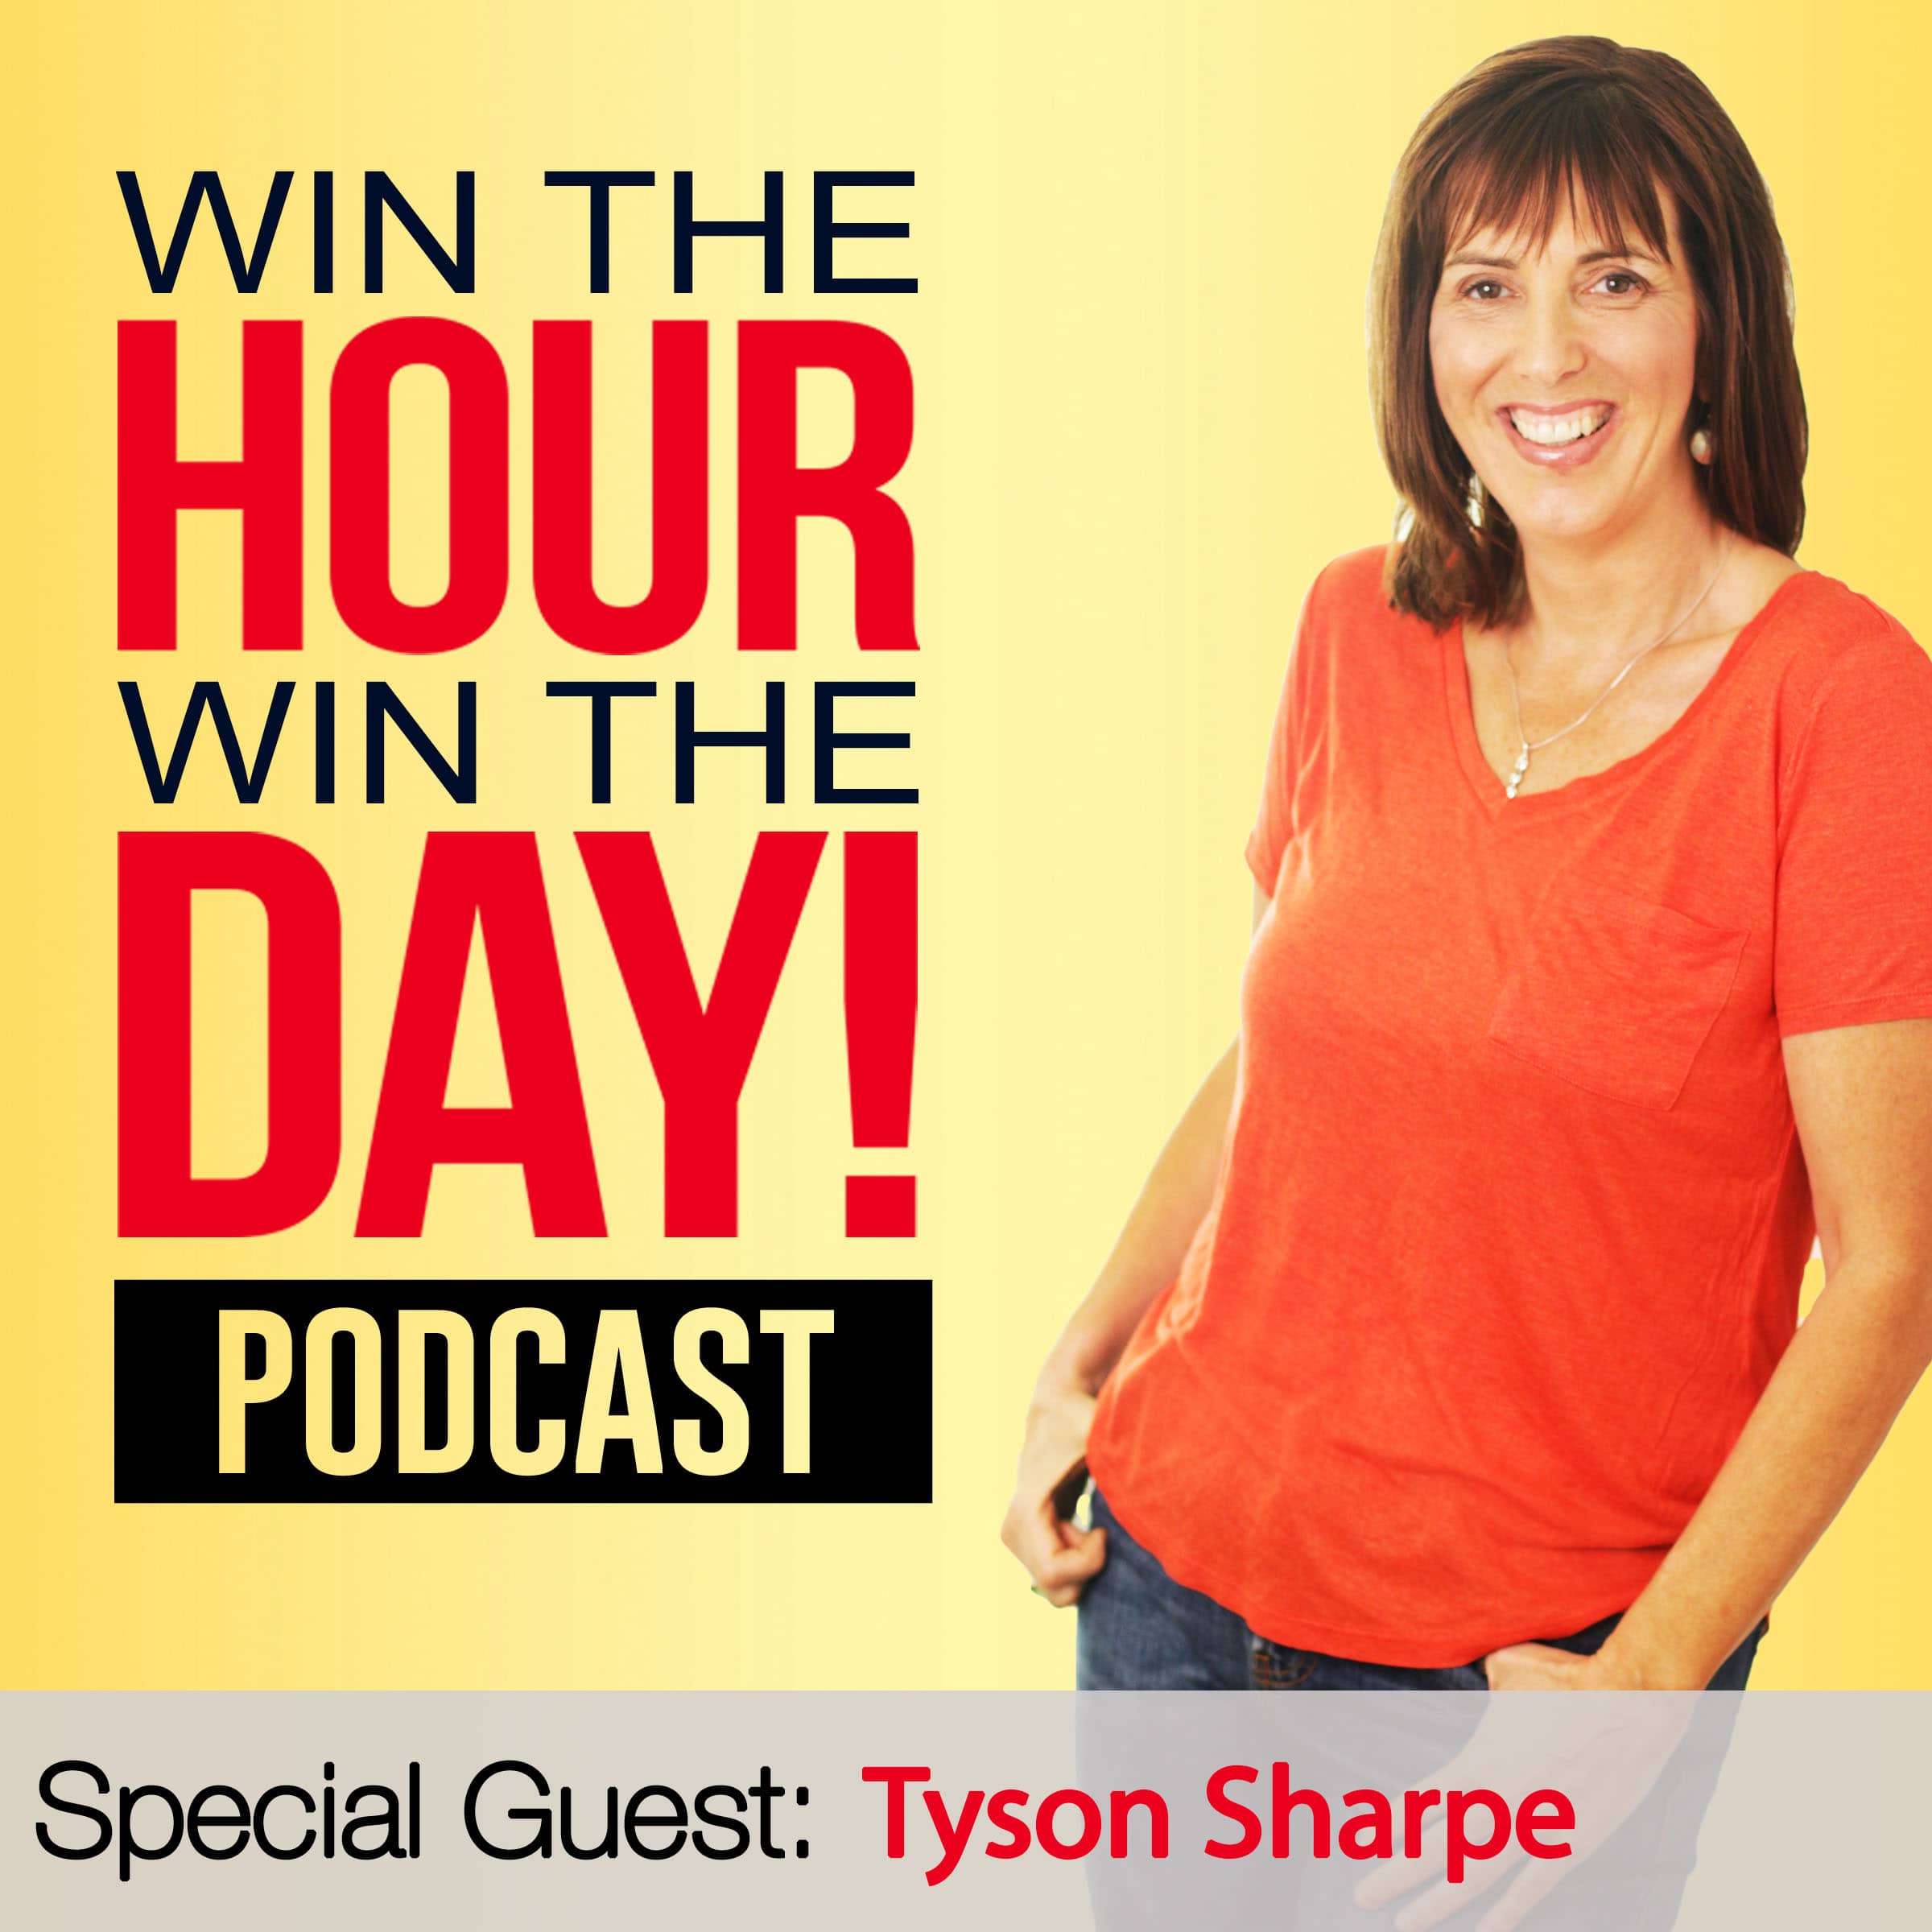 How To Fly With Creativity And Ease! With Tyson Sharpe